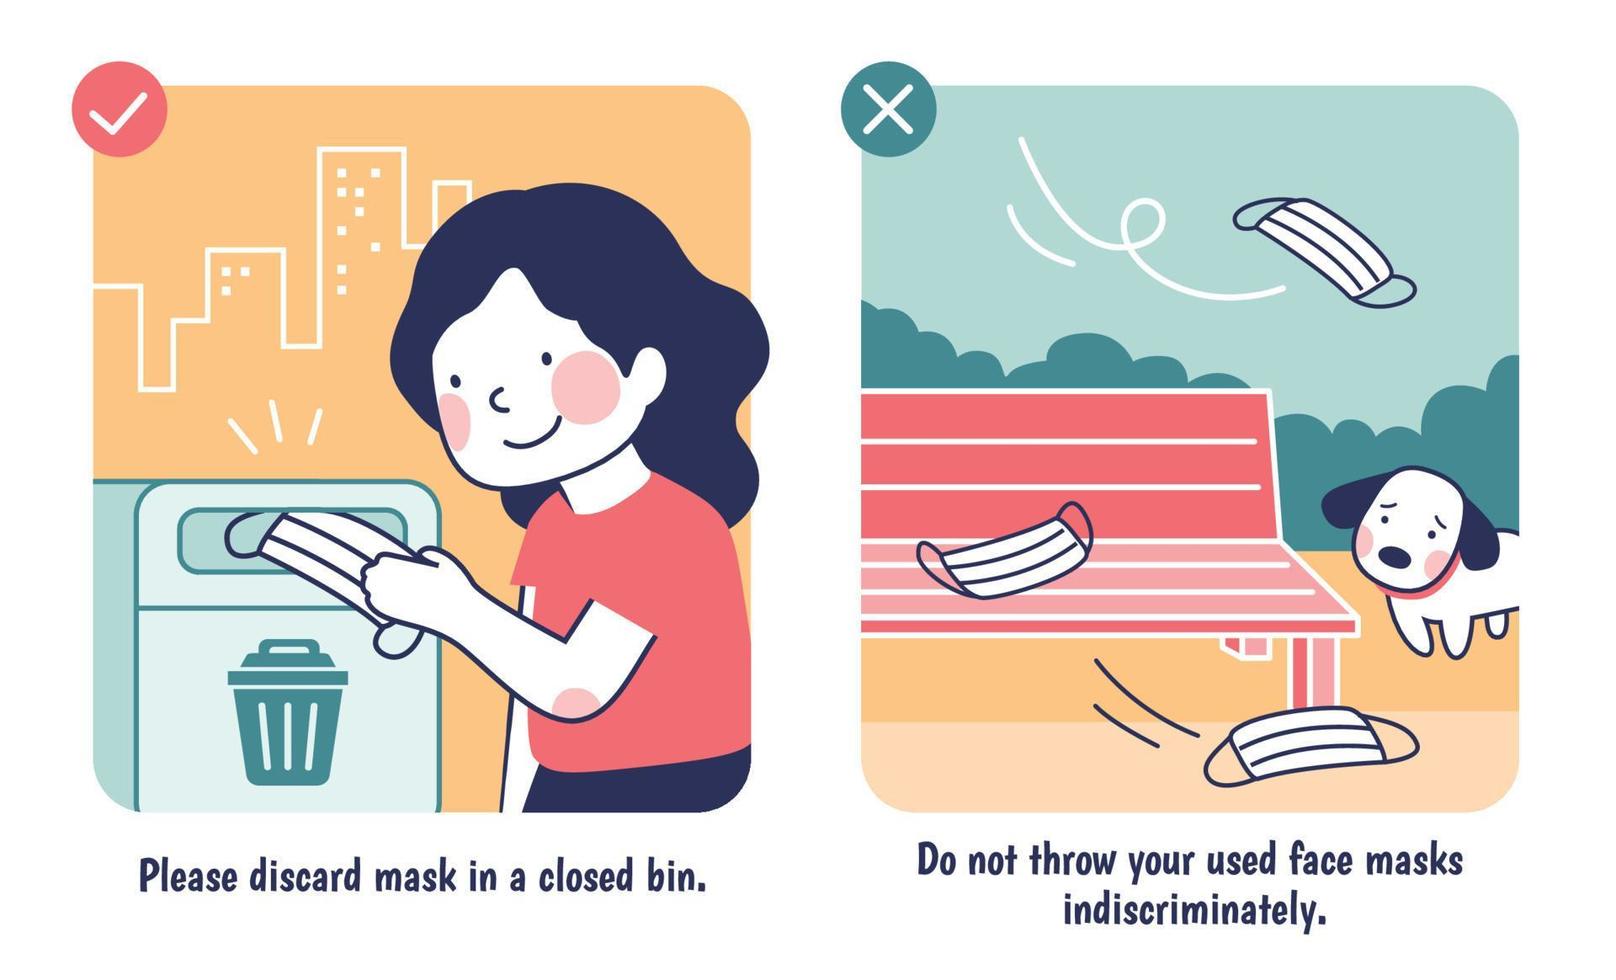 Dispose of the used mask in a lidded rubbish bin and do not throw it indiscriminately, recommended guidance for used mask vector